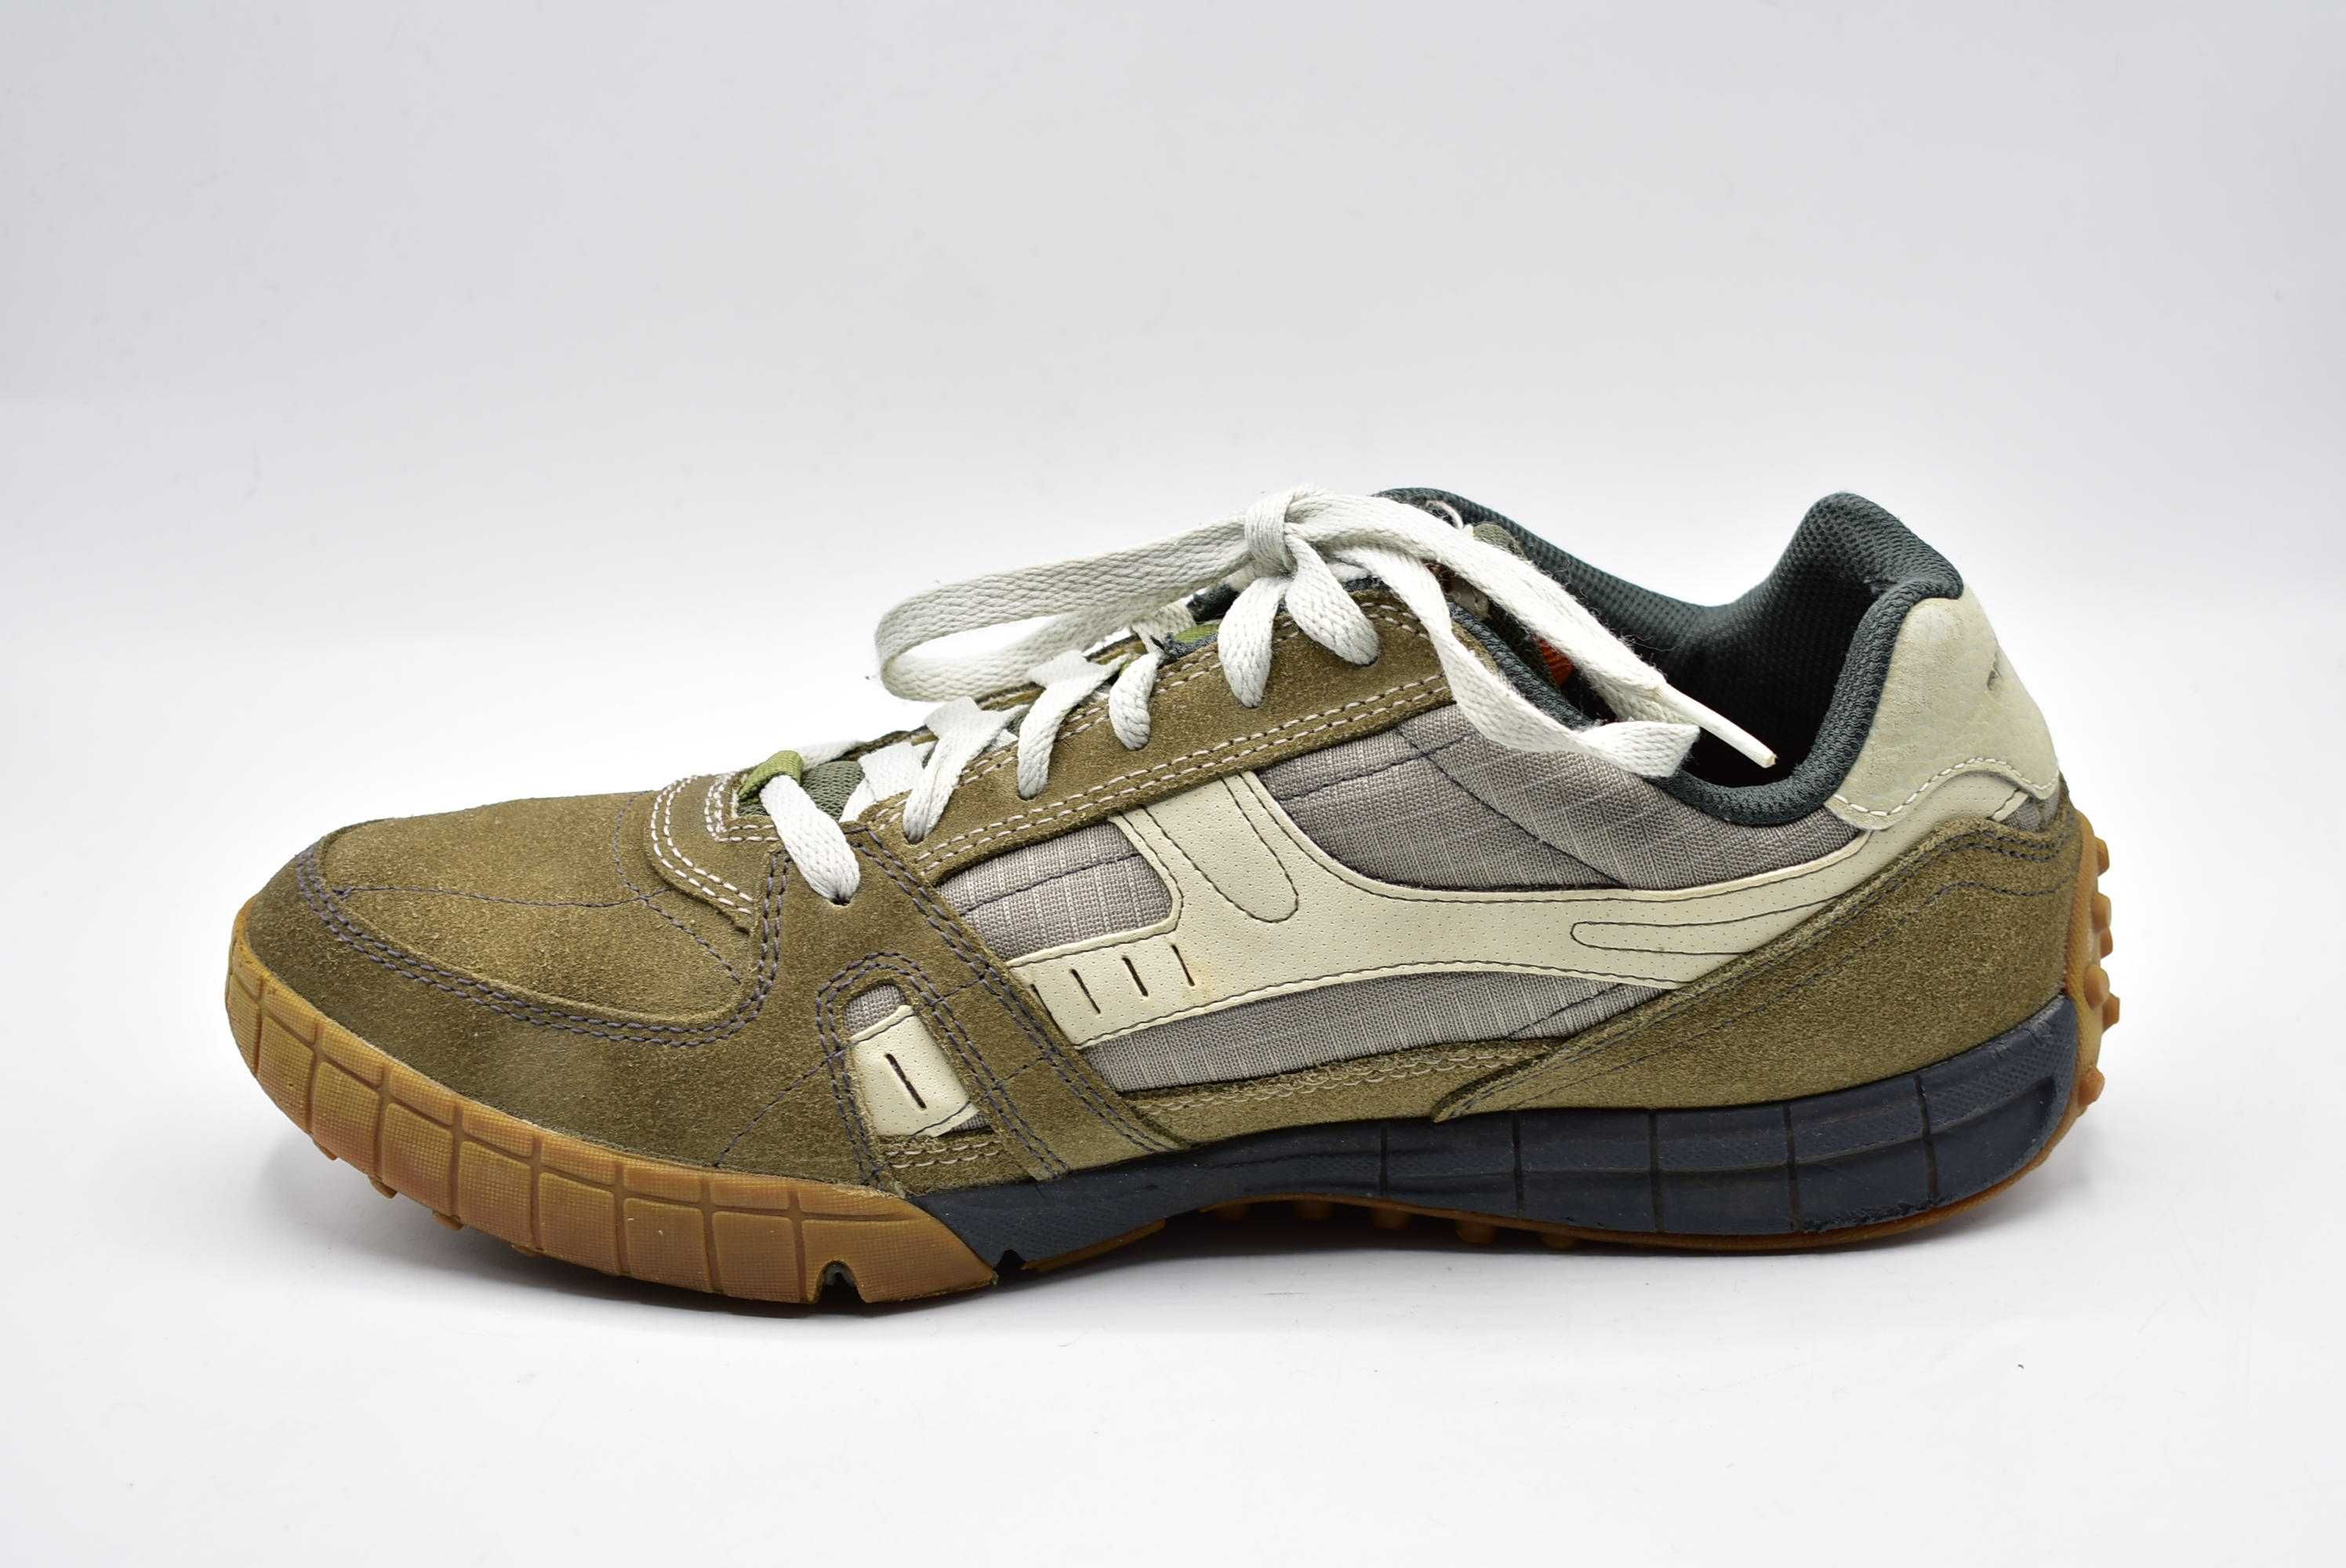 Skechers Relaxed Fit: Floater roz. 43